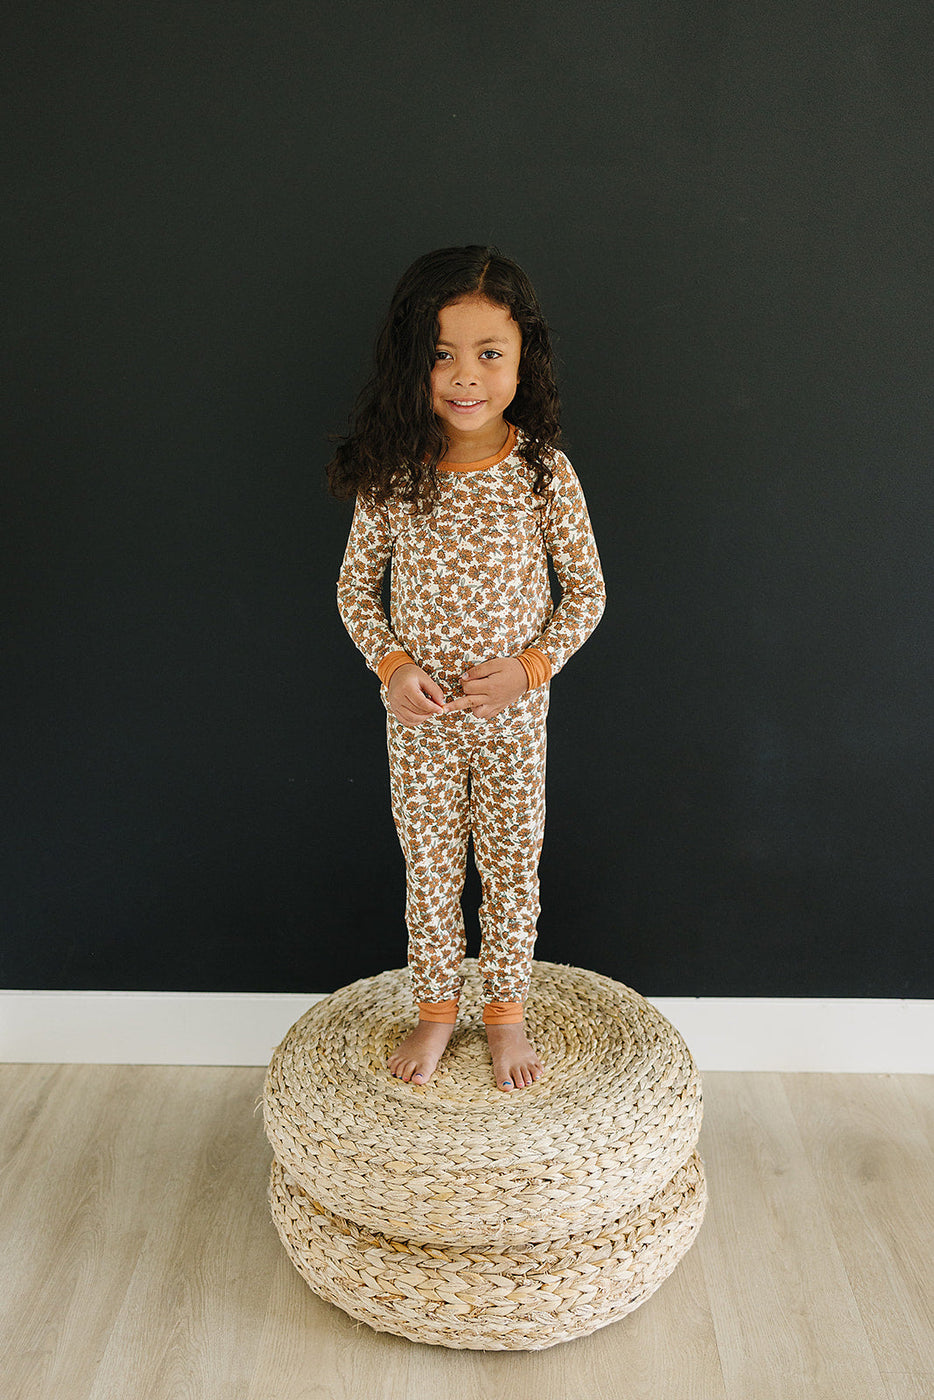 a girl standing on a round object